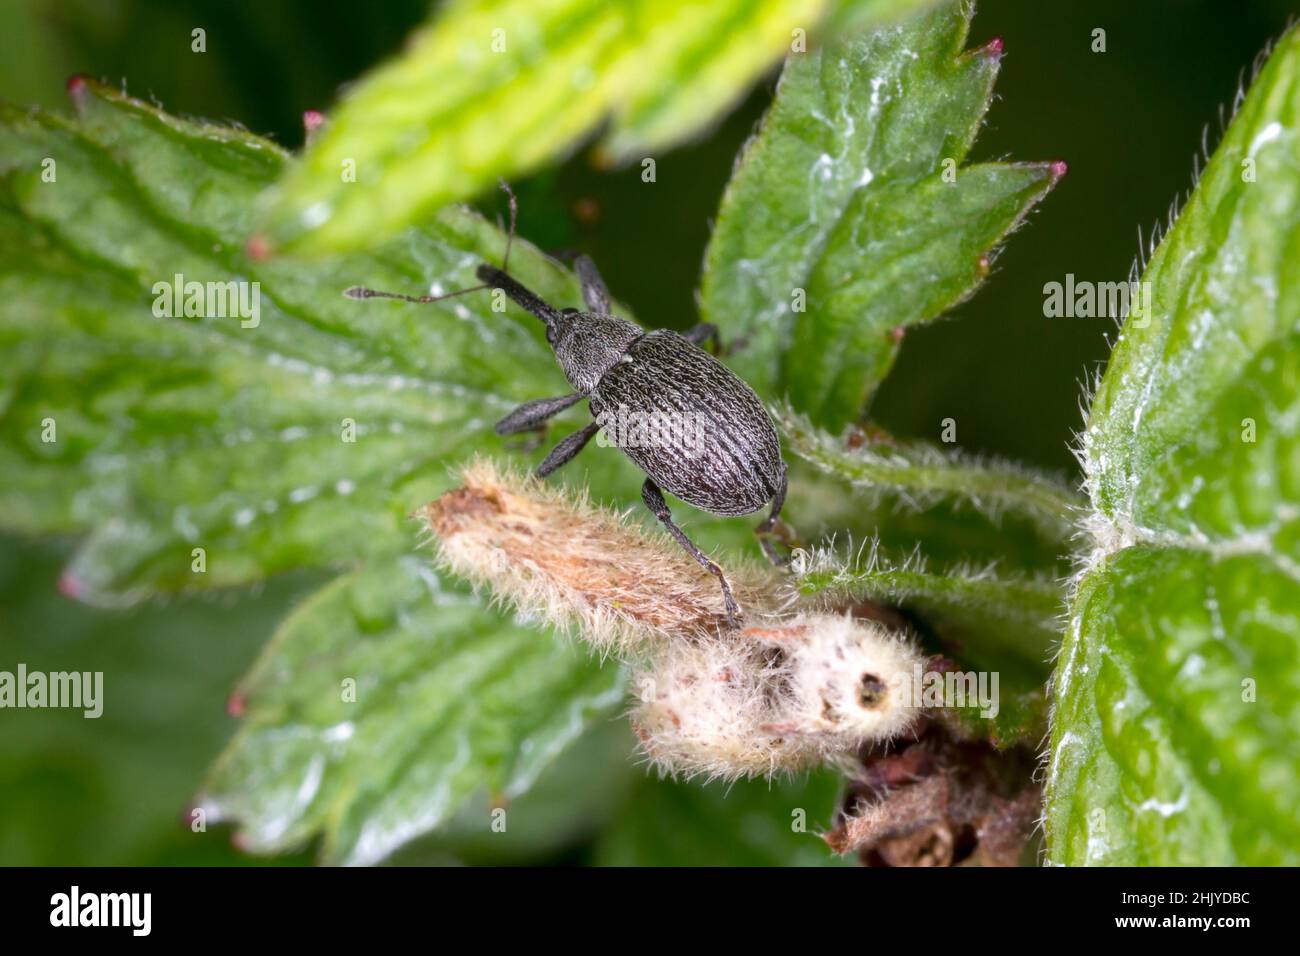 Close up of a grey striped weevil ( Curculionidae ) on leaf. Stock Photo